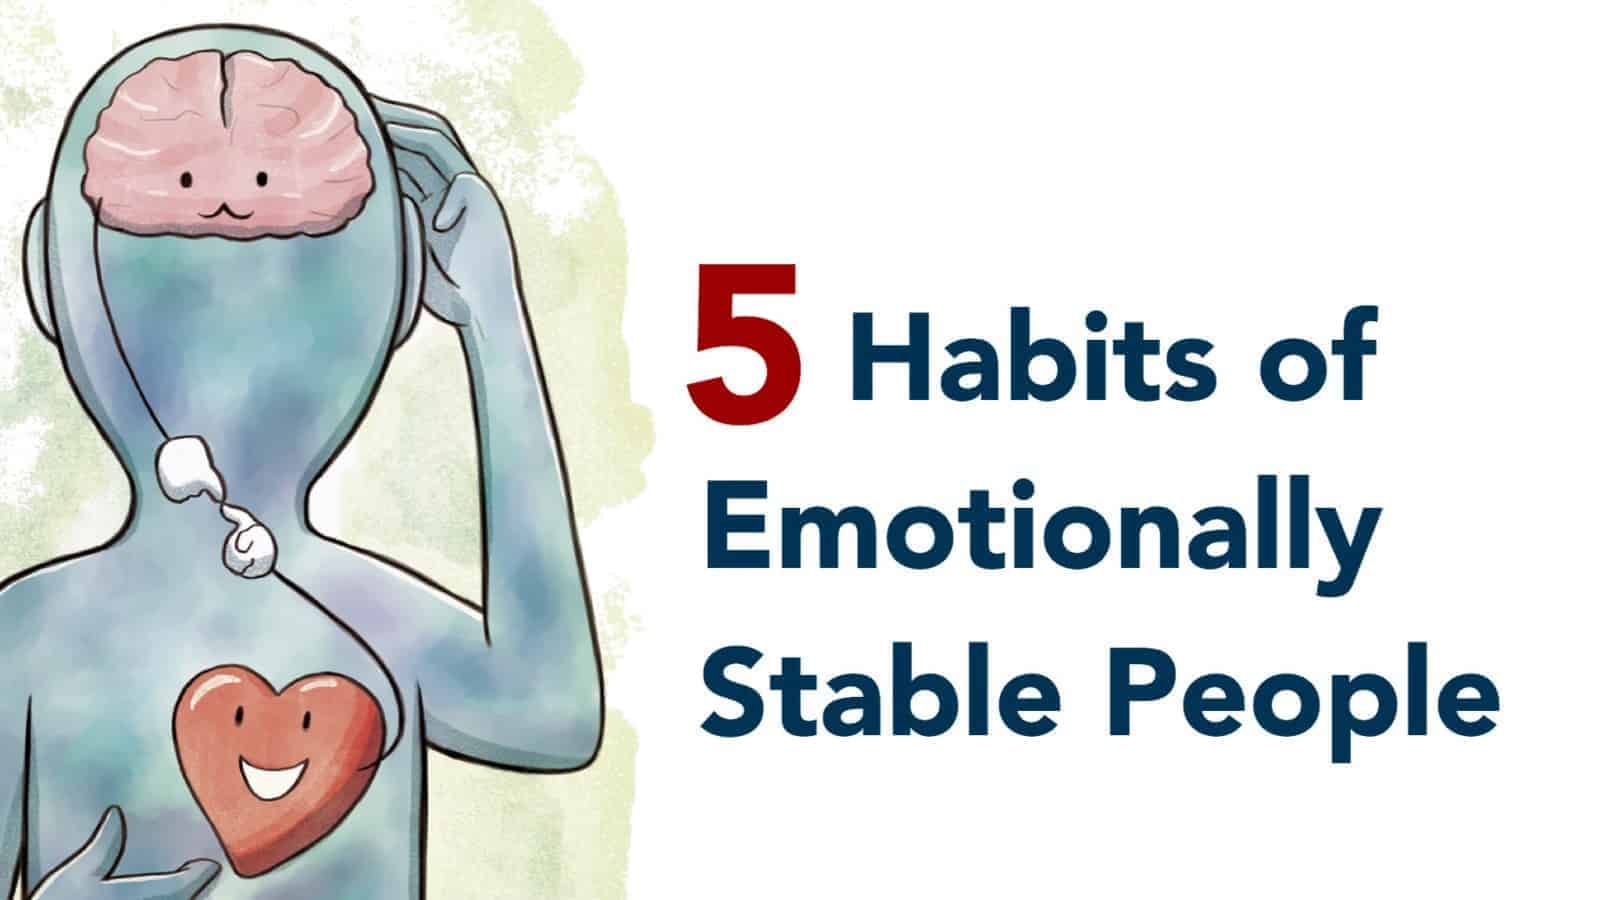 5 Habits of Emotionally Stable People